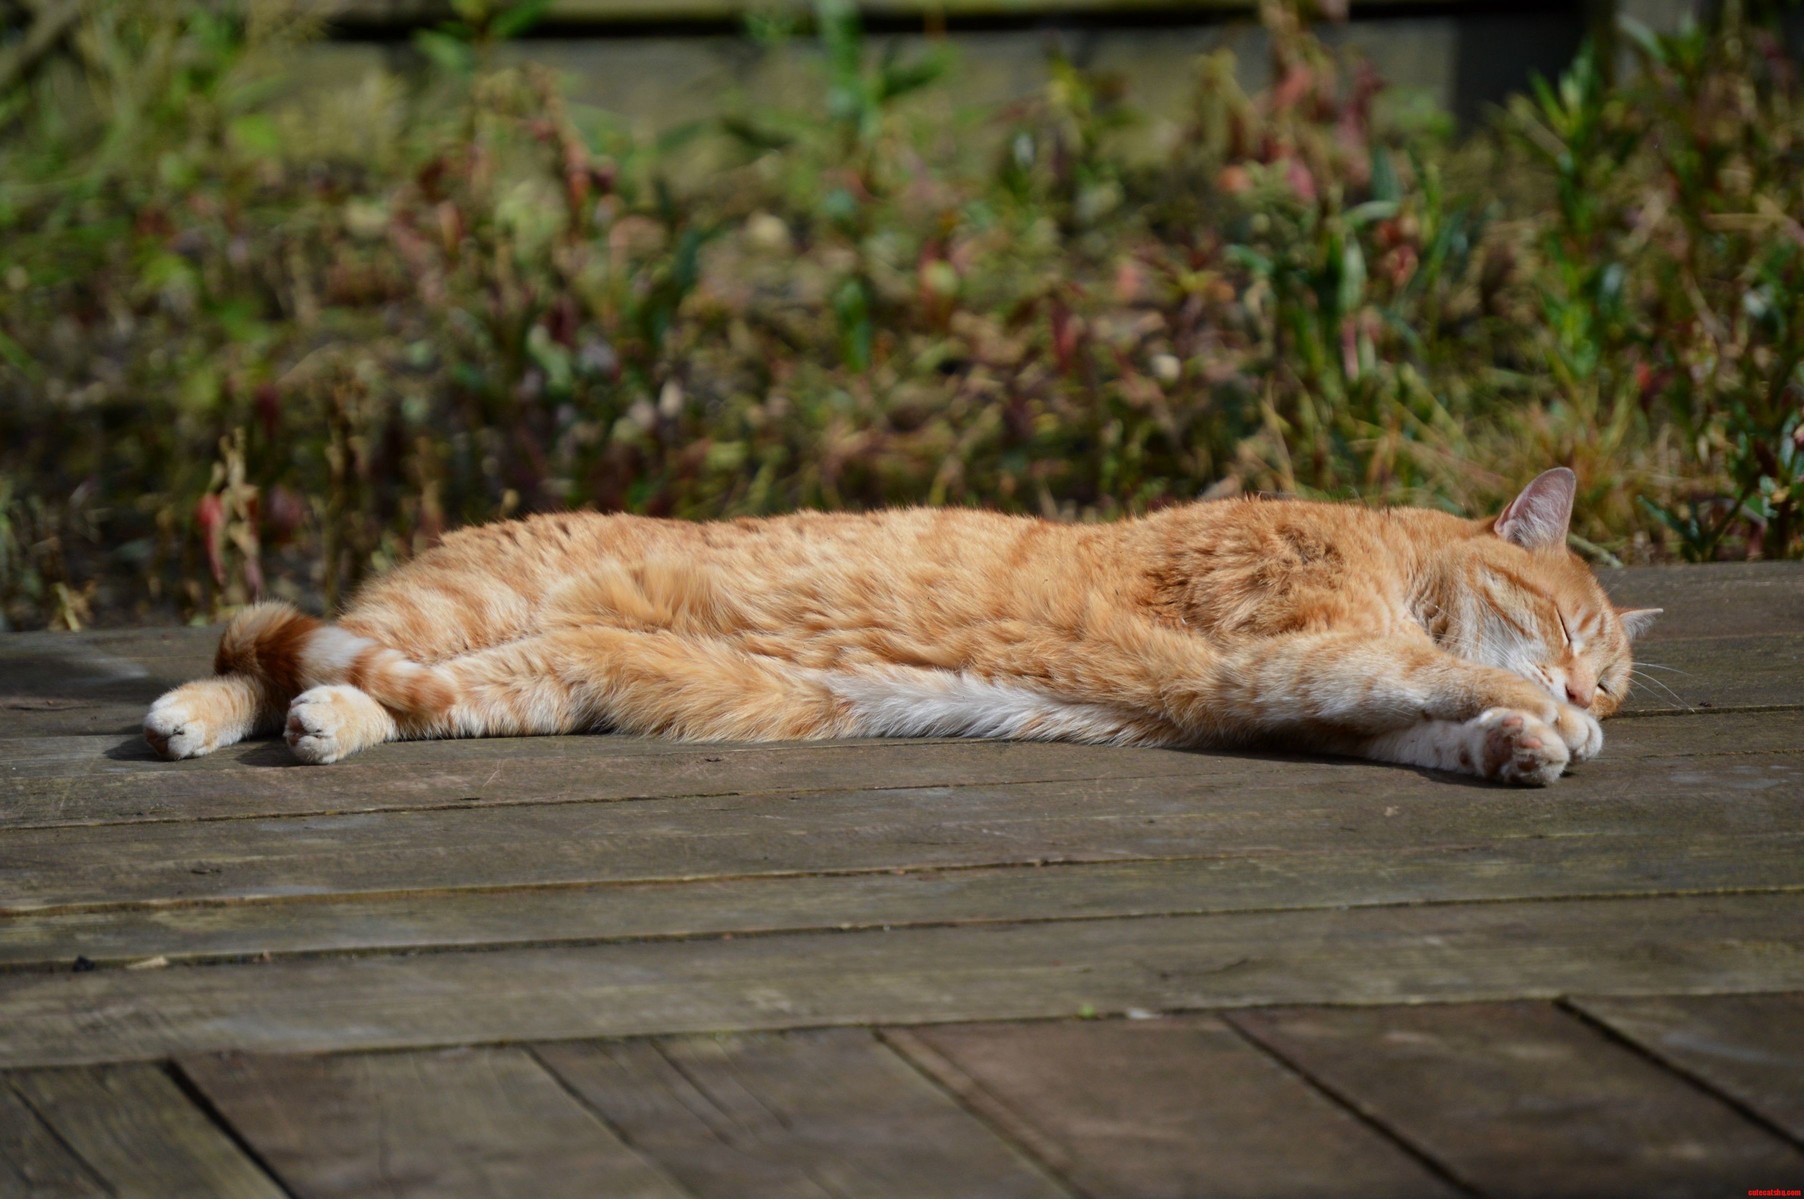 Whiskey basking in the sunlight | Cute cats HQ - Pictures of cute cats